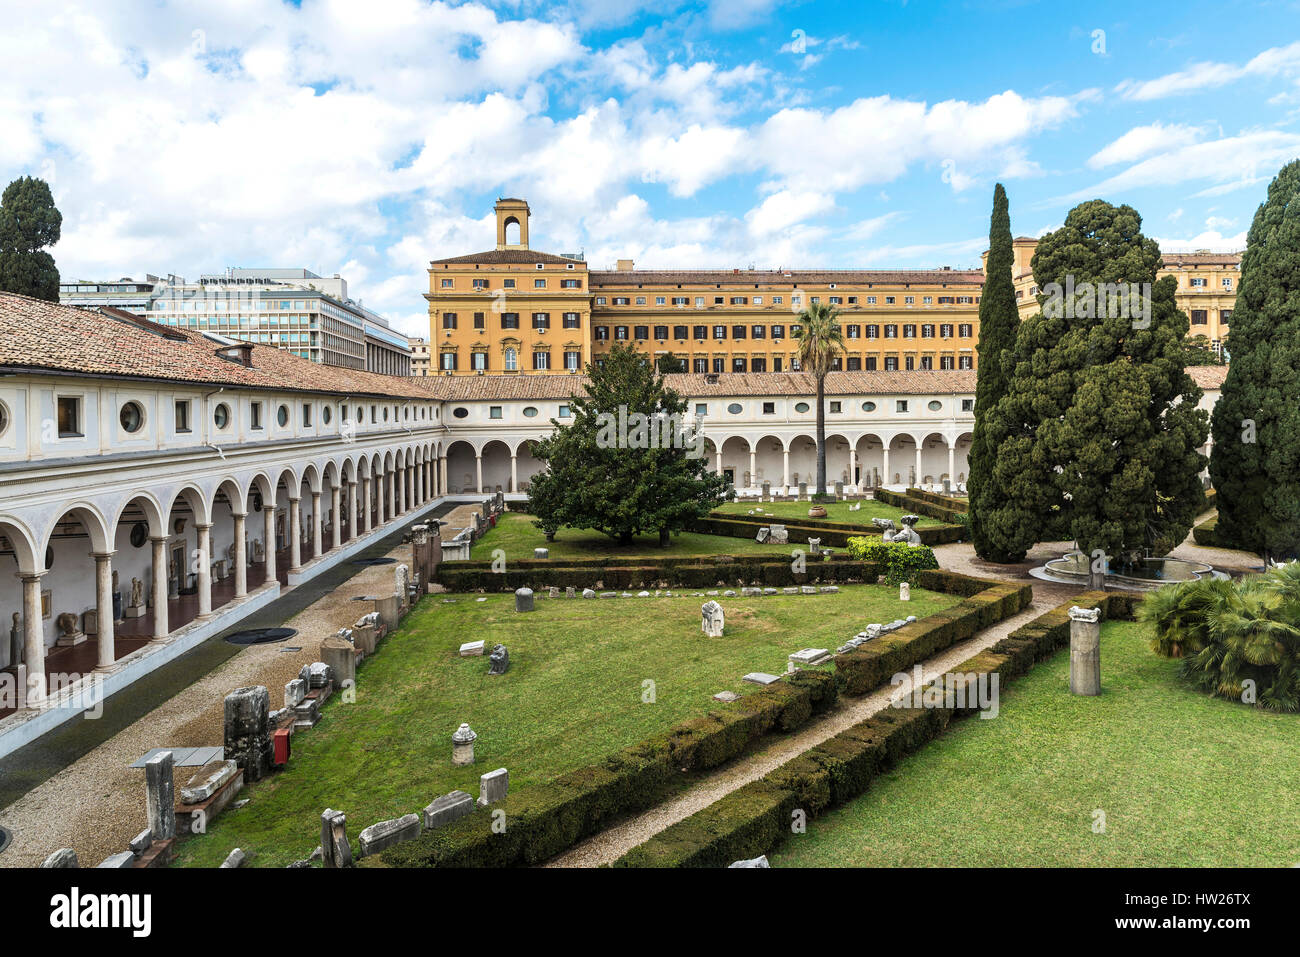 Garden of the convent cloister of Certosini with Roman ruins next to the thermal baths of Diocleziano in Rome, Italy Stock Photo